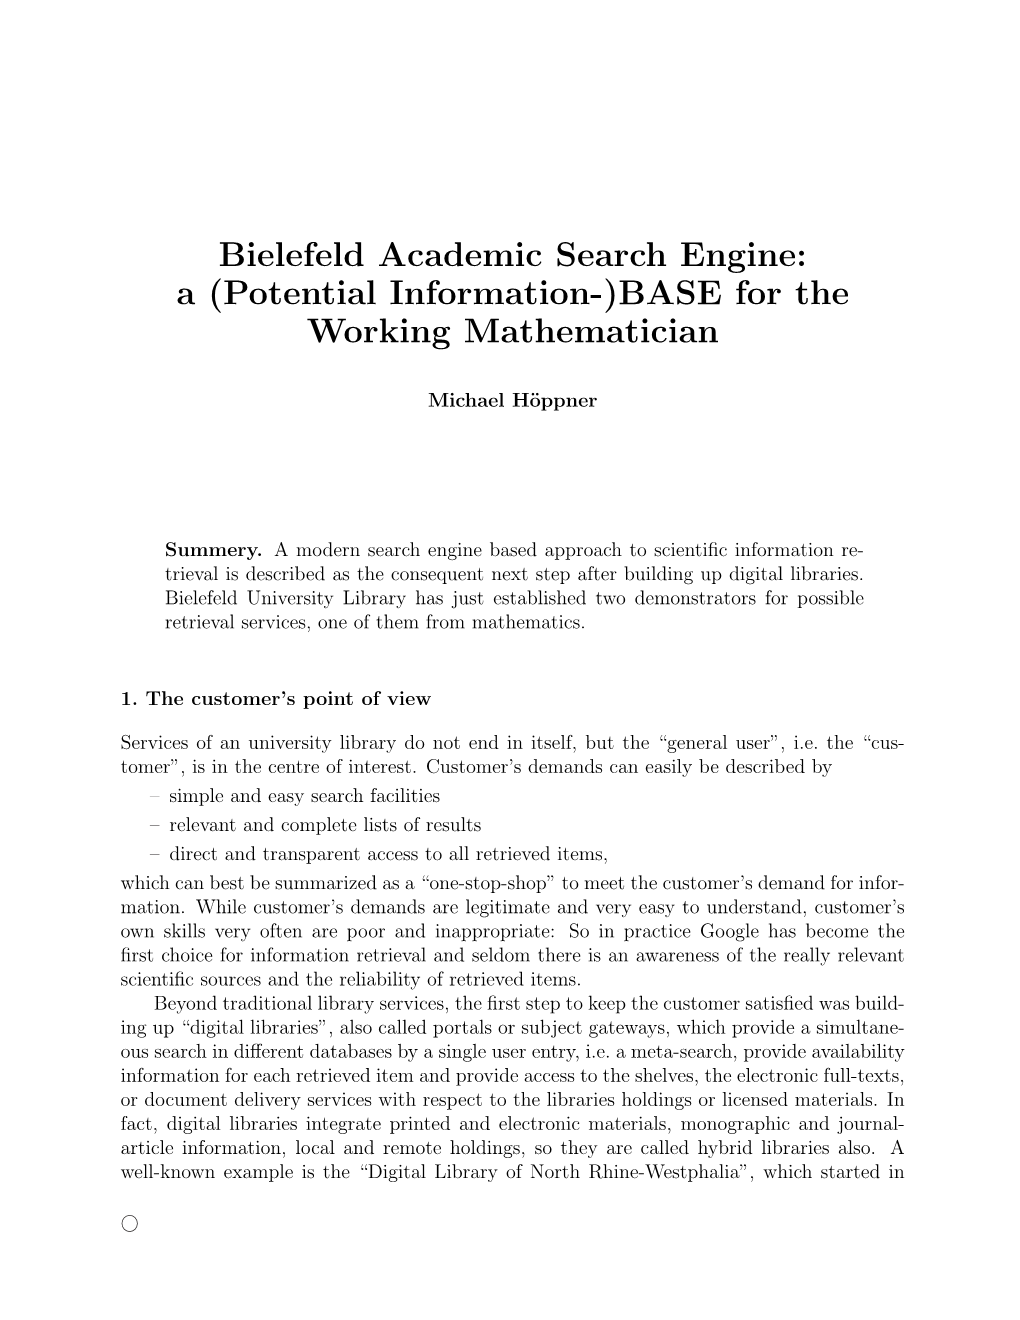 Bielefeld Academic Search Engine: a (Potential Information-)BASE for the Working Mathematician